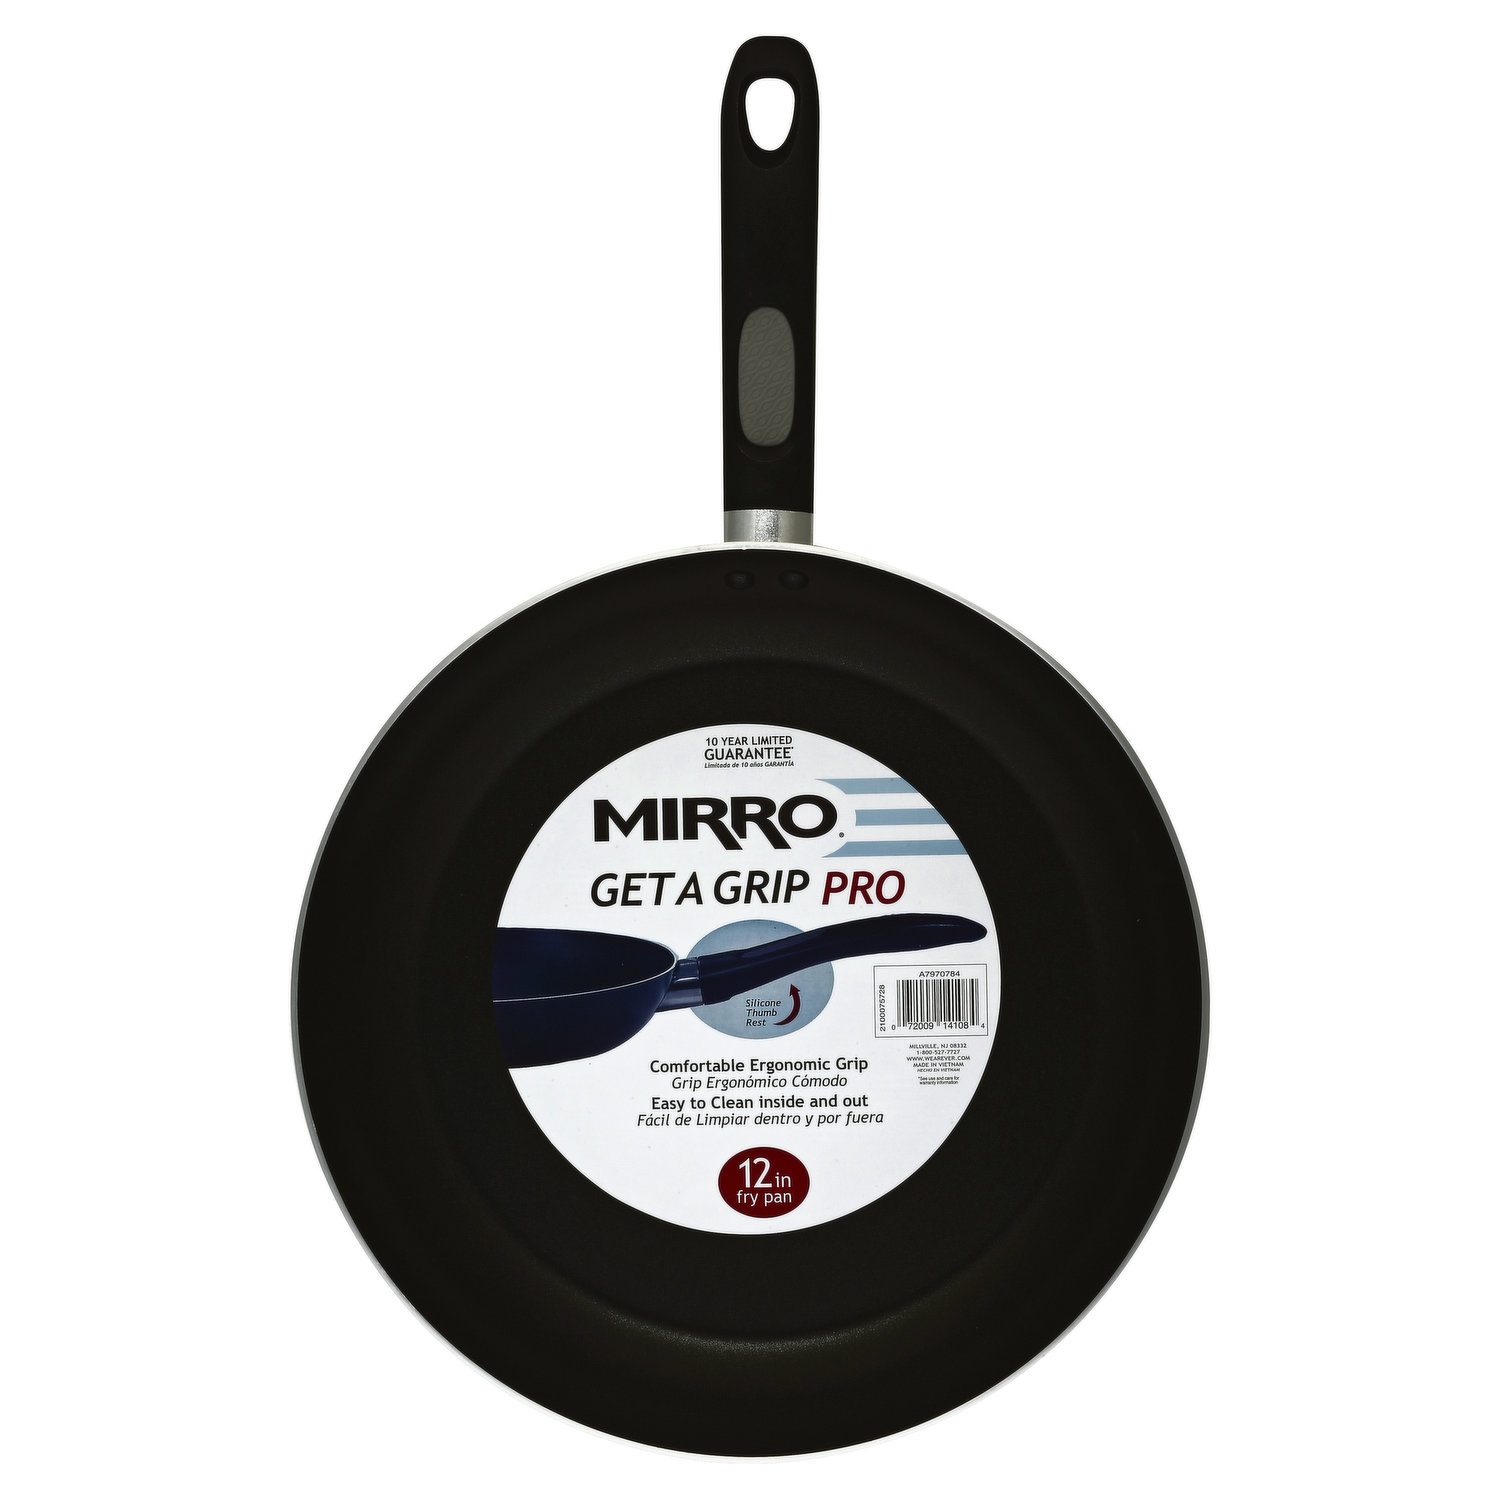 Bialetti Granito X-Tra Fry Pan, 12 Inches (30 cm), Grocery